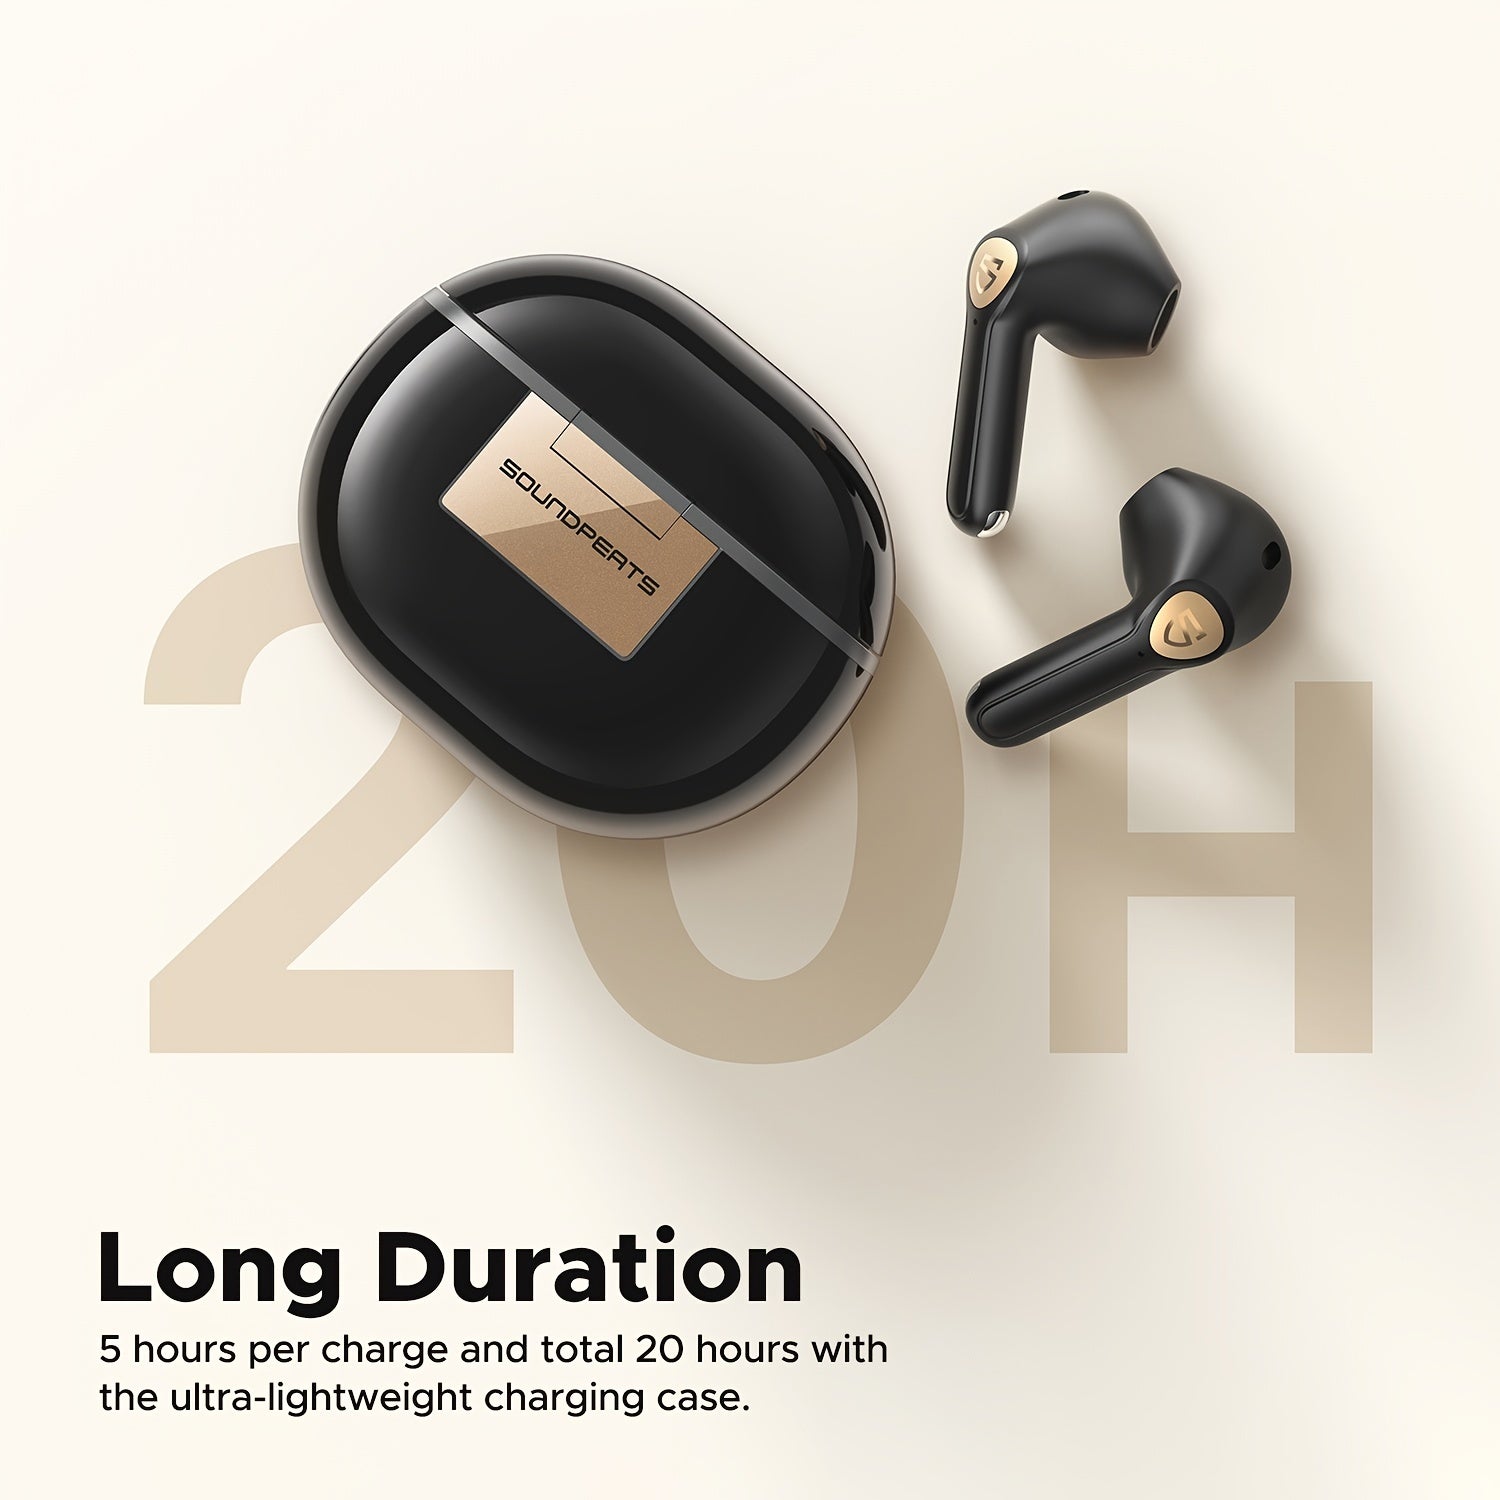 SOUNDPEATS Wireless Earbuds Air3 Deluxe HS With Hi-Res Audio Certification And LDAC Codec, Wireless 5.2 Earphones With 4 Mics And ENC For Calls, 14.2mm Driver, 60ms Low Latency Game Mode